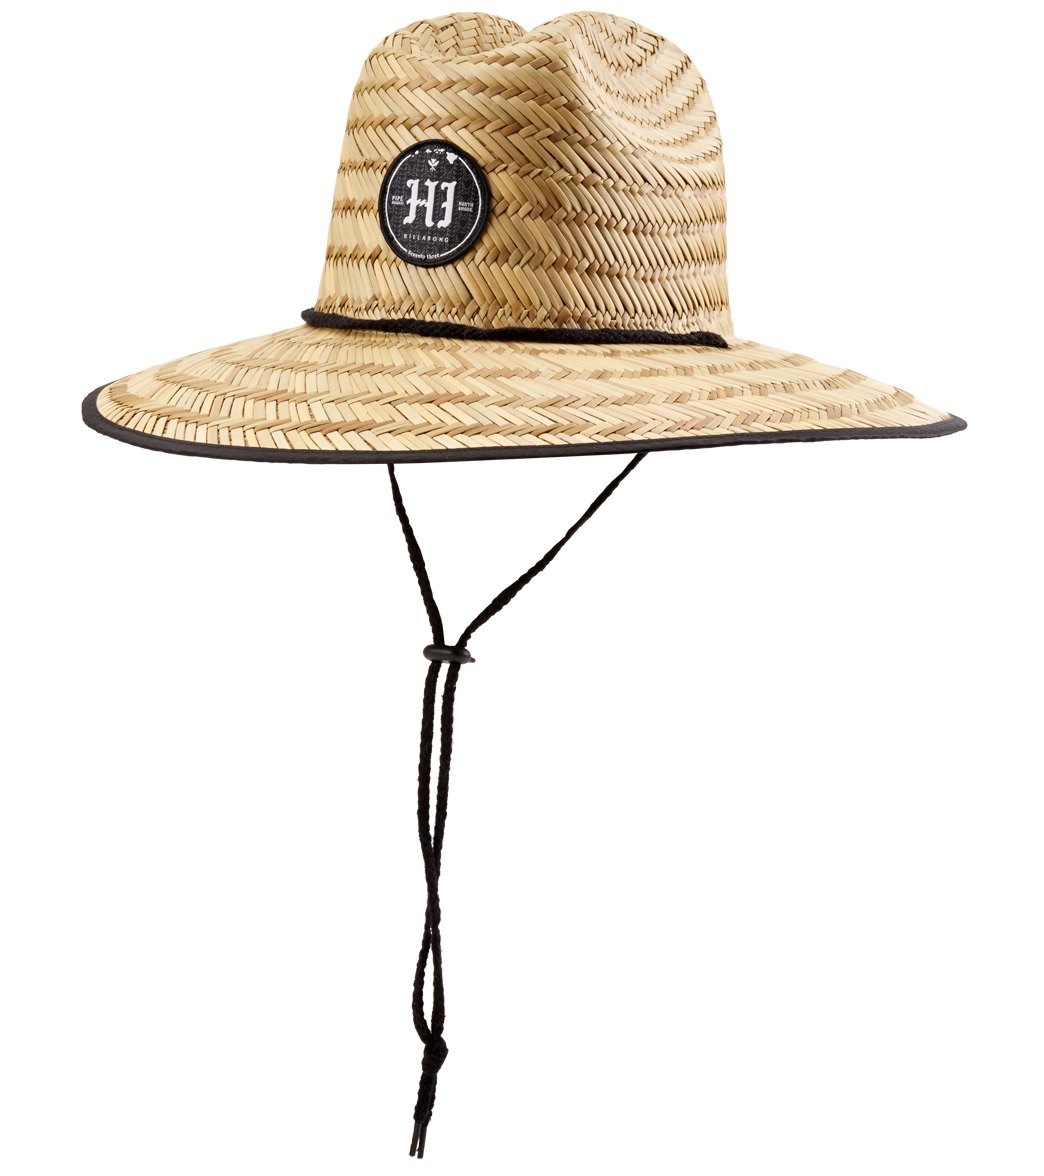 Billabong Men's Pipe Masters Straw Hat at SwimOutlet.com